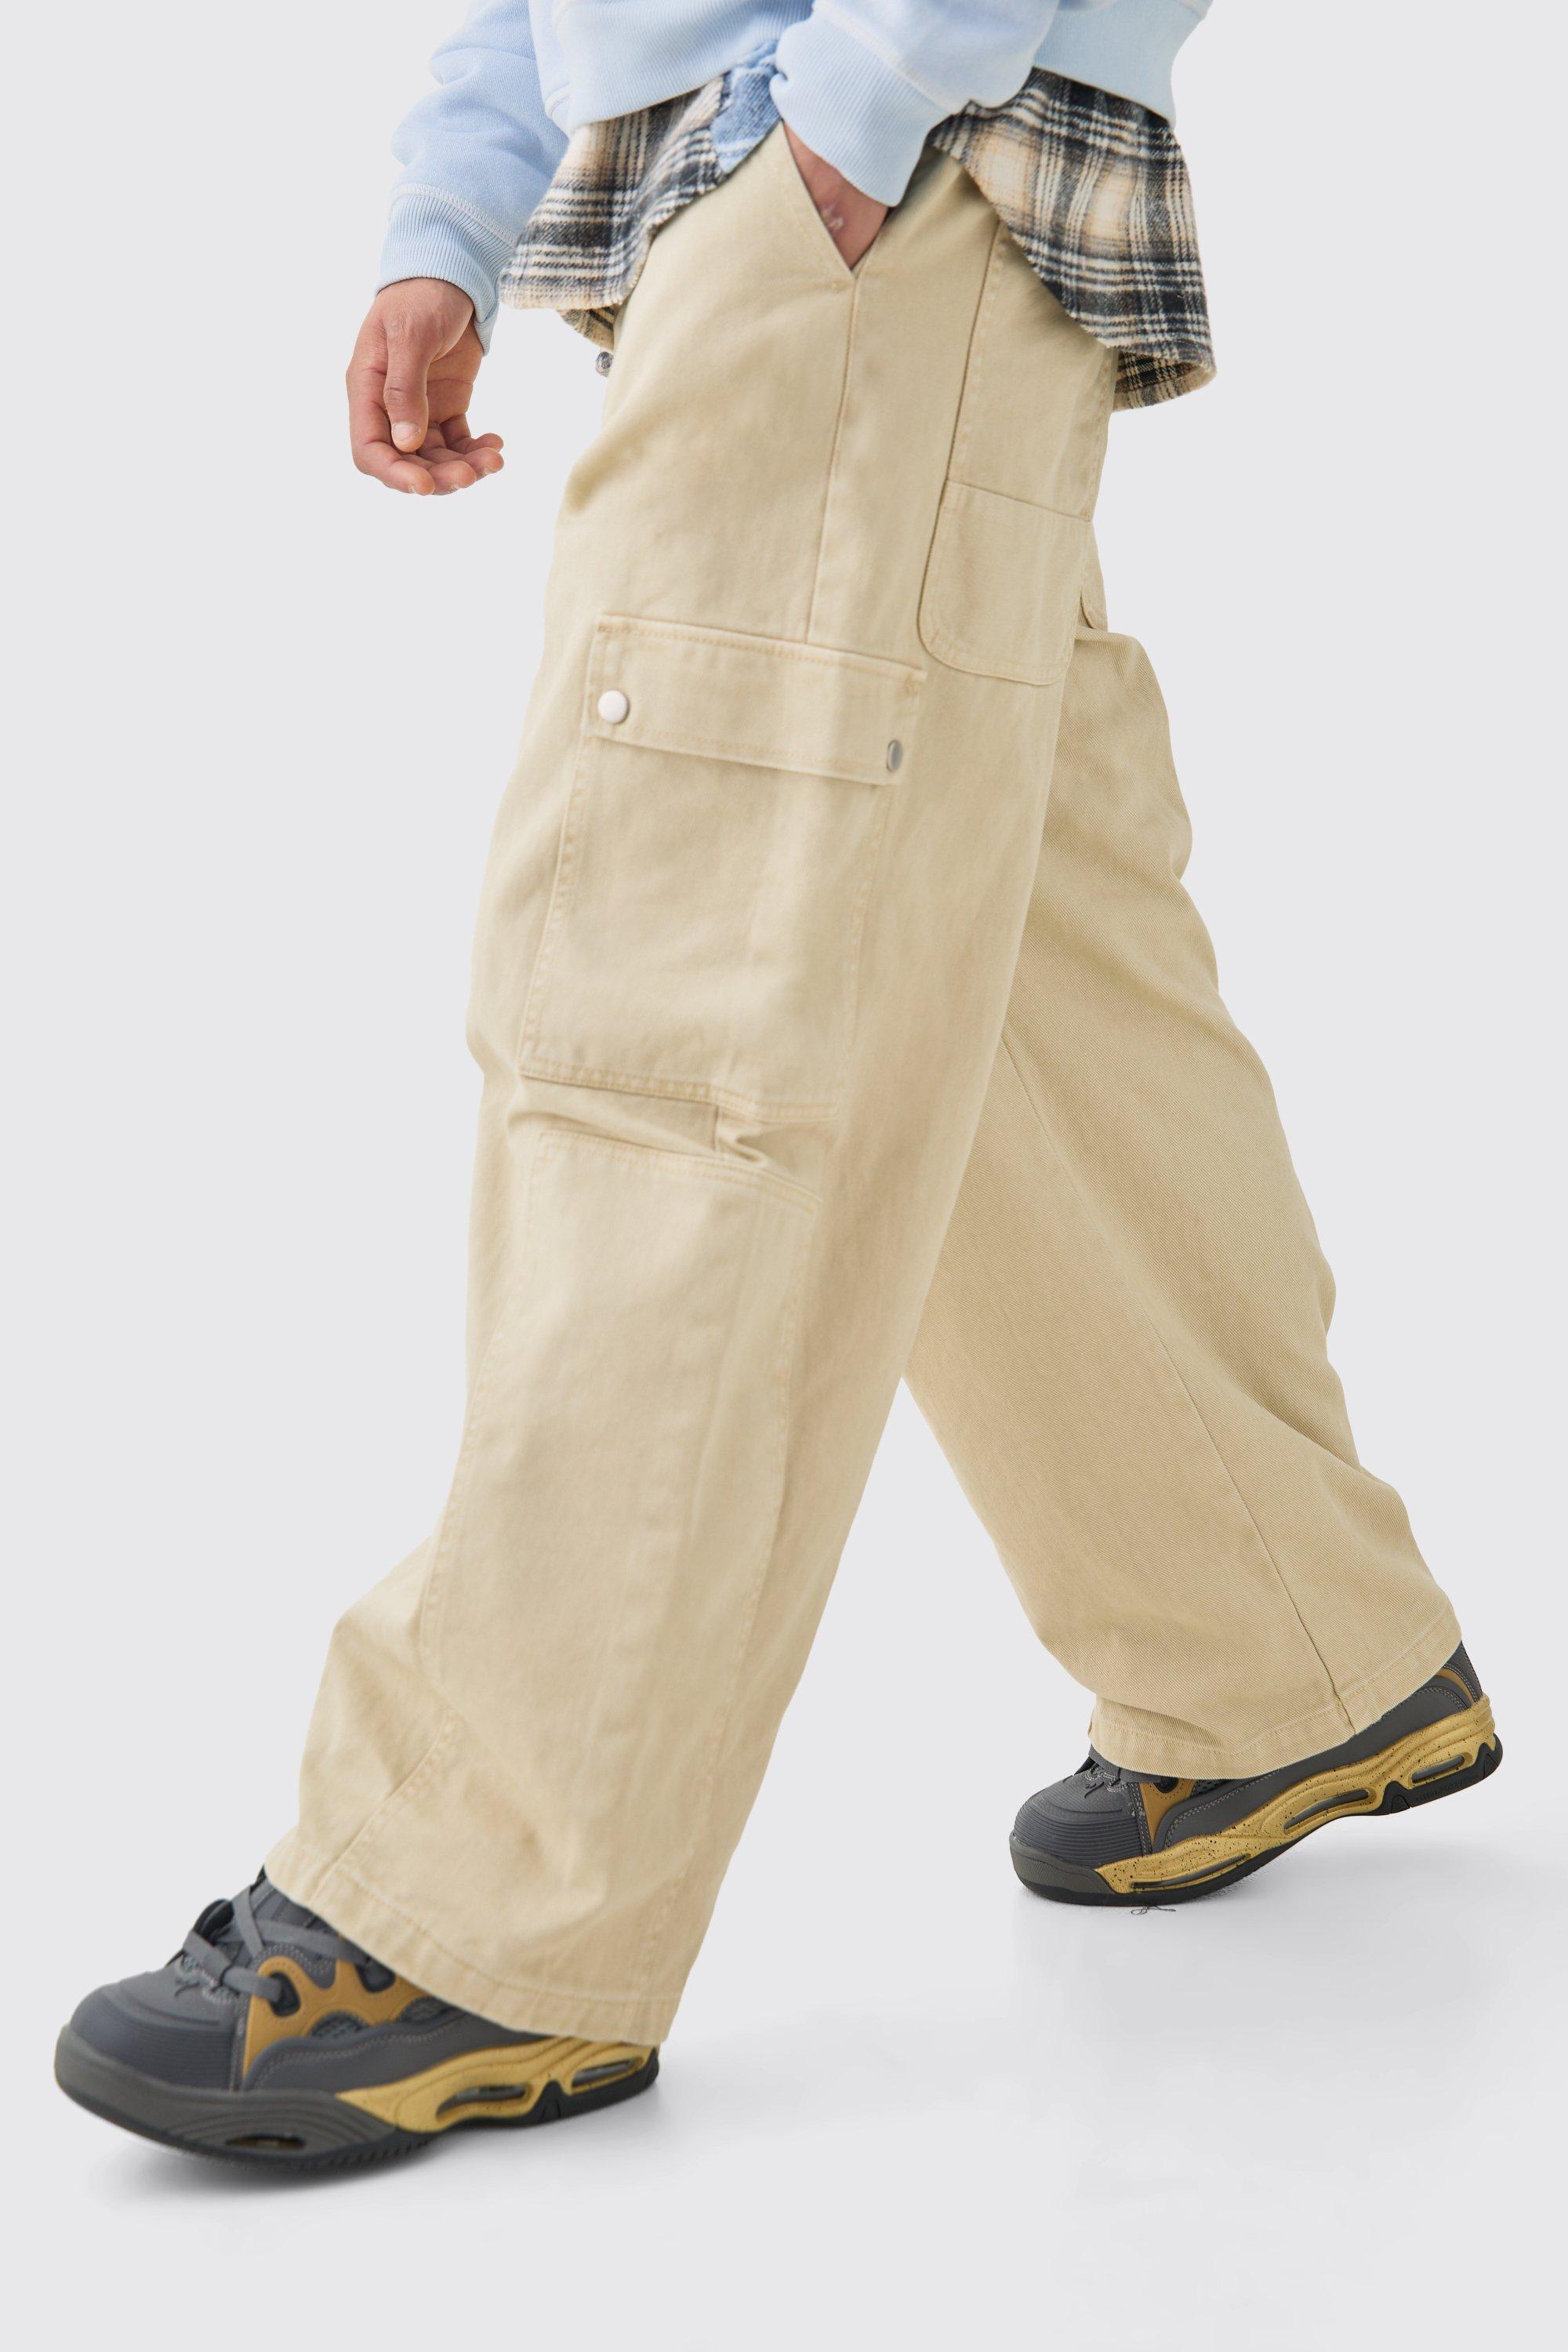 Image of Elasticated Waist Extreme Wide Fit Cargo Jeans In Ecru, Cream